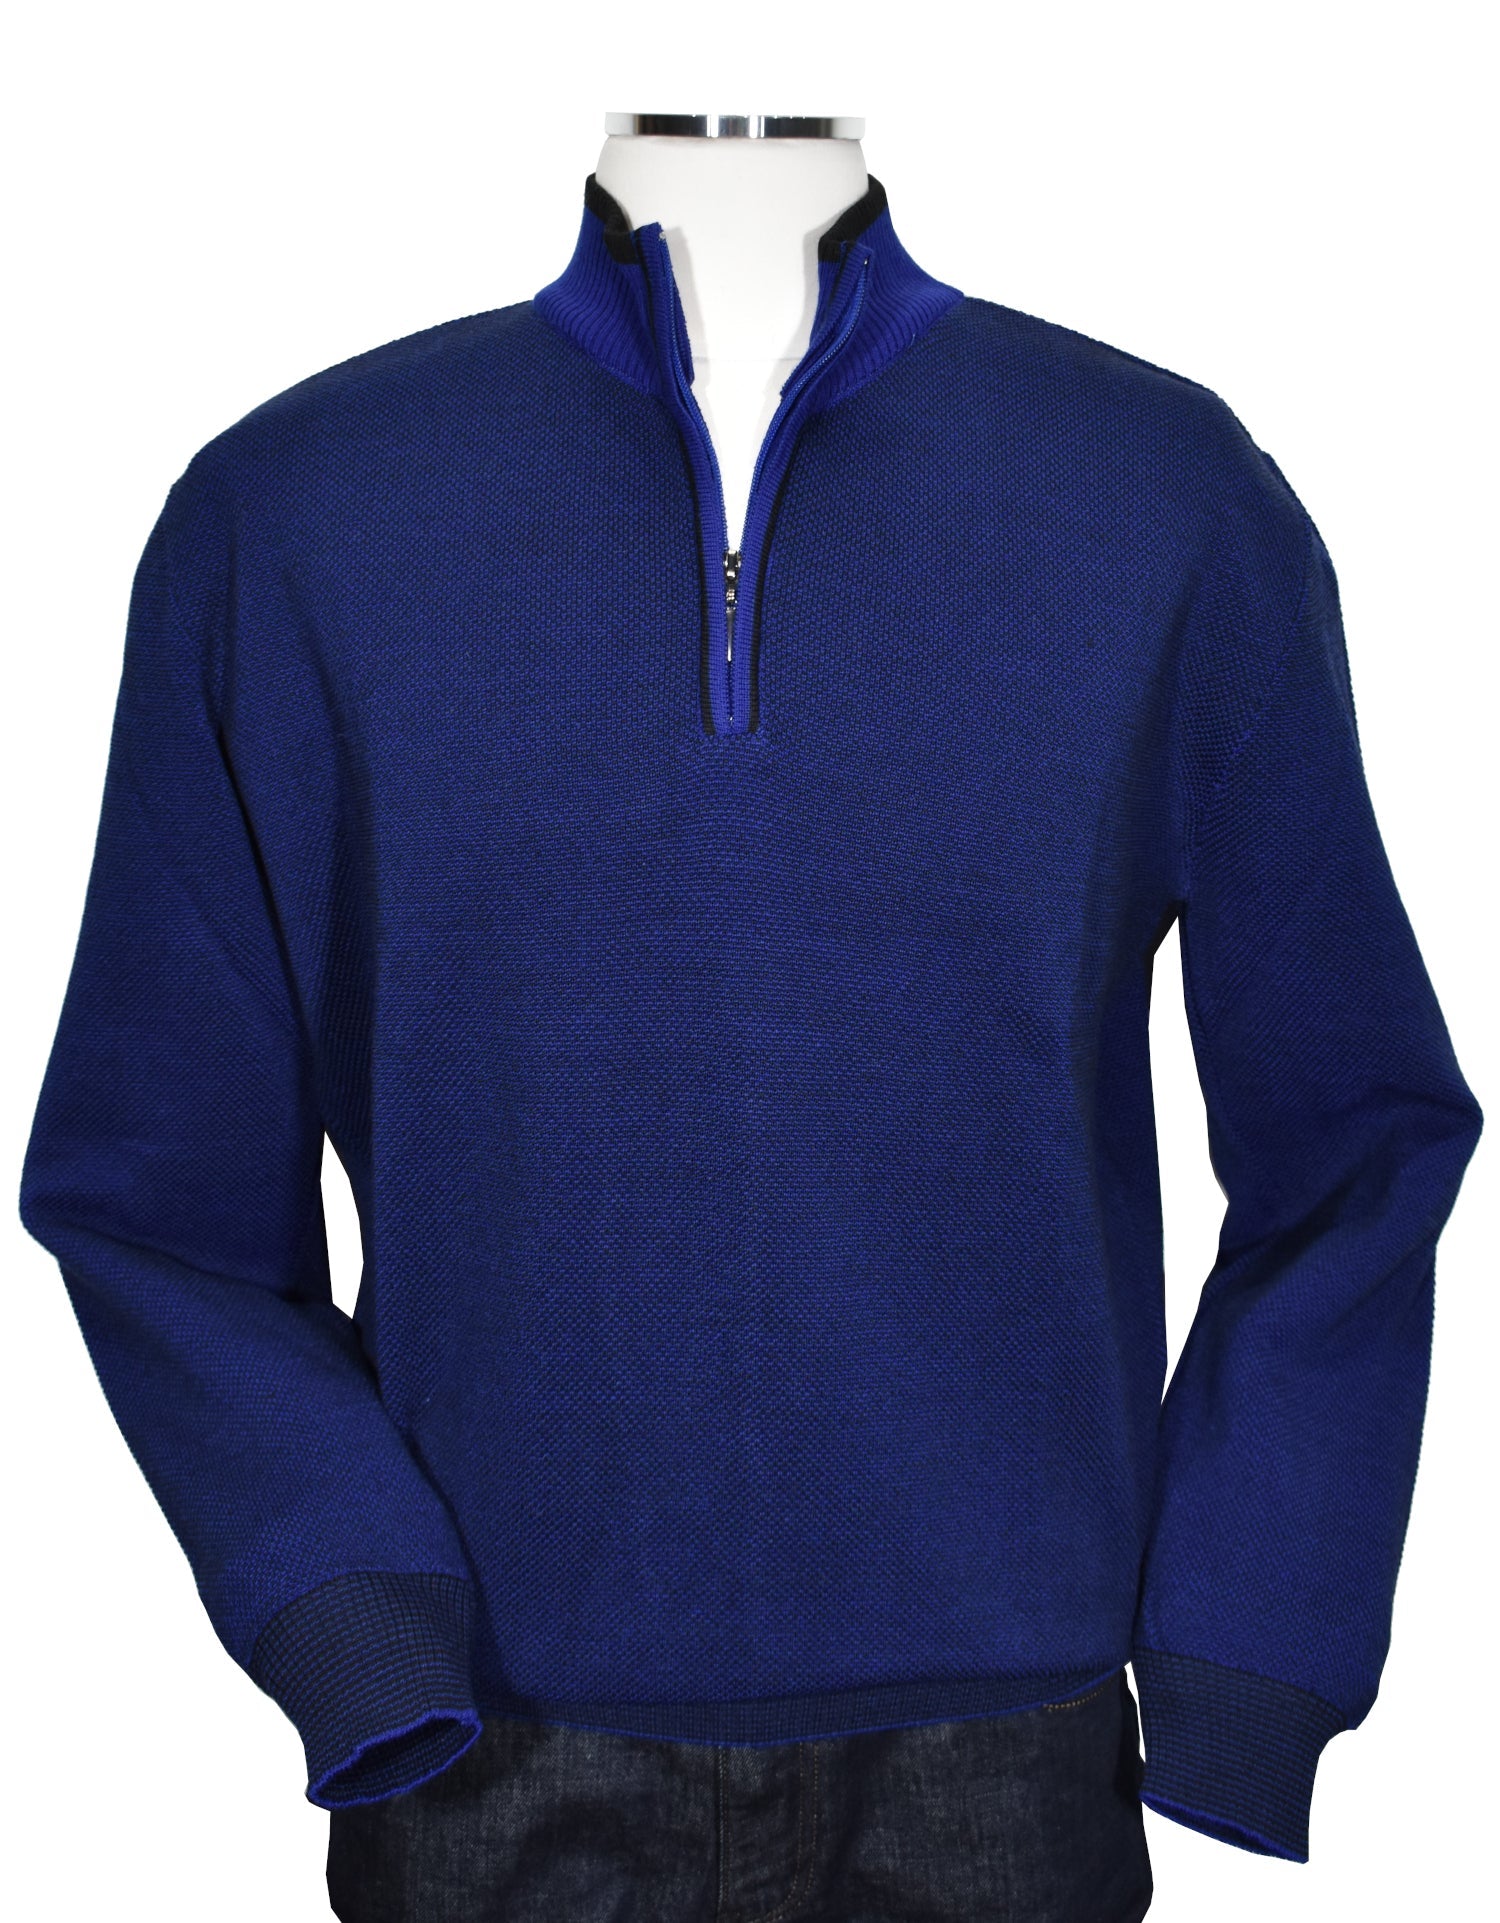 Marcello Quarter Zip  Stay warm and comfortable with the modern style of the 562 Marcello Exclusive Quarter Zip. Crafted with fine two-color yarns knitted together and contrast stitch work, it makes the perfect addition to any wardrobe. Italian merino wool blend ensures a classic style, making it ideal for dress or casual occasions.